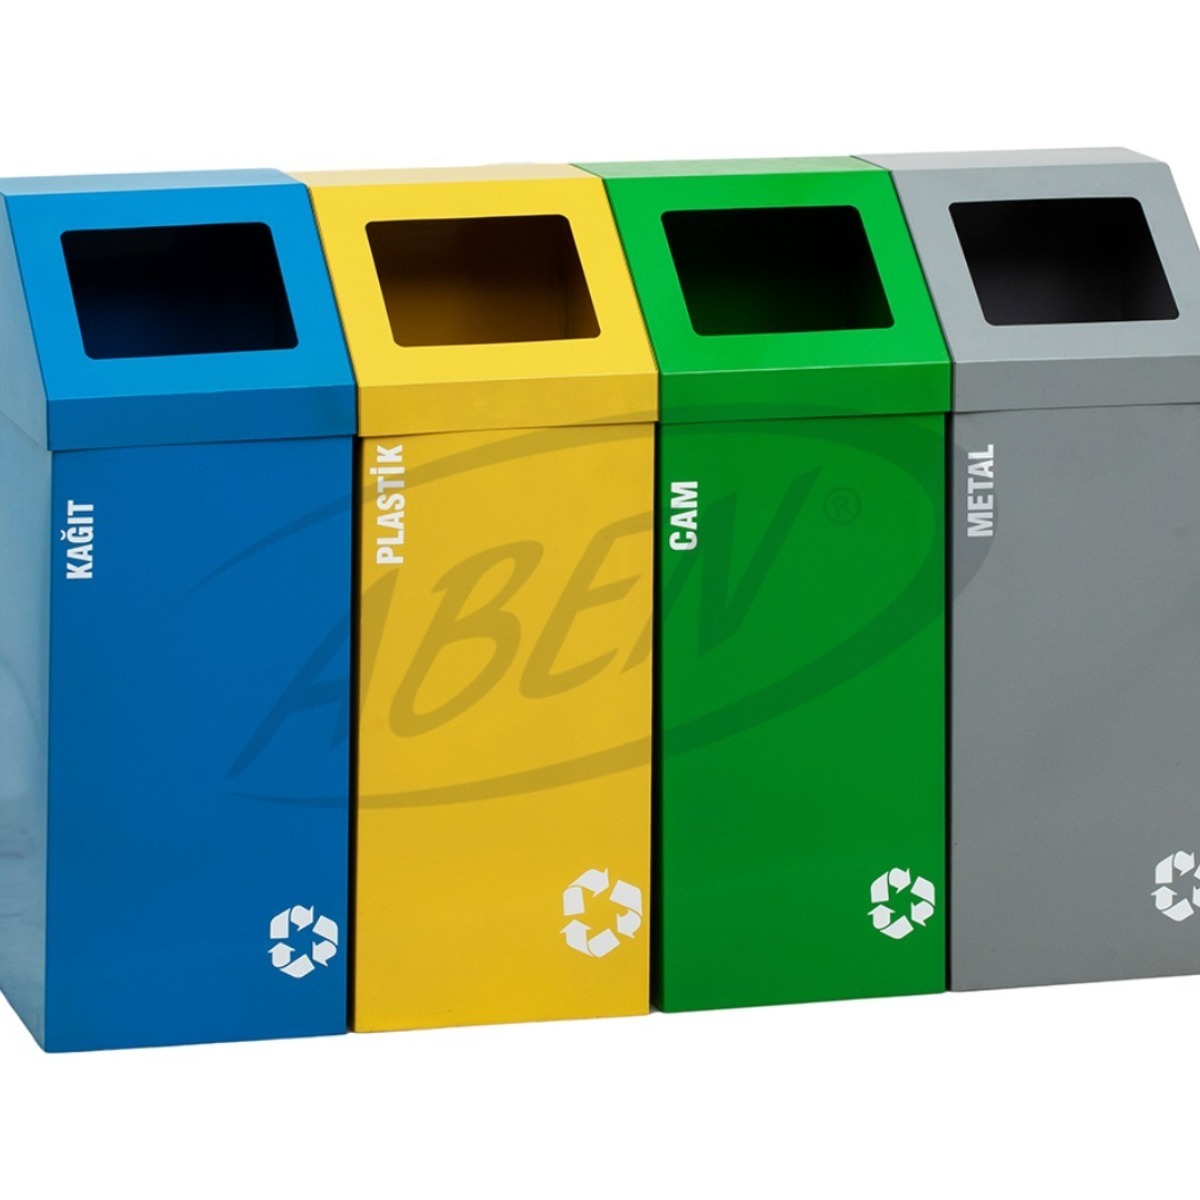 AB-742 4'Part Recycle Bin